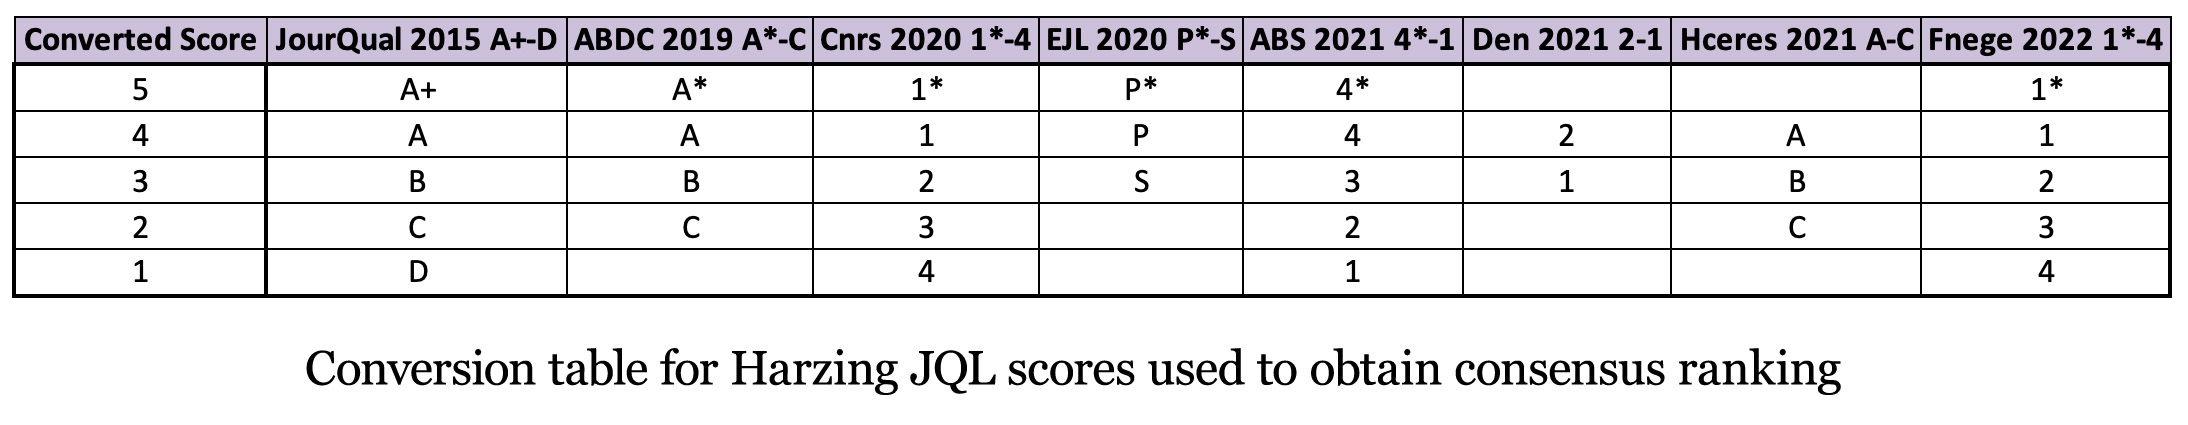 Conversion table for Harzing JQL scores used to obtain consensus ranking 